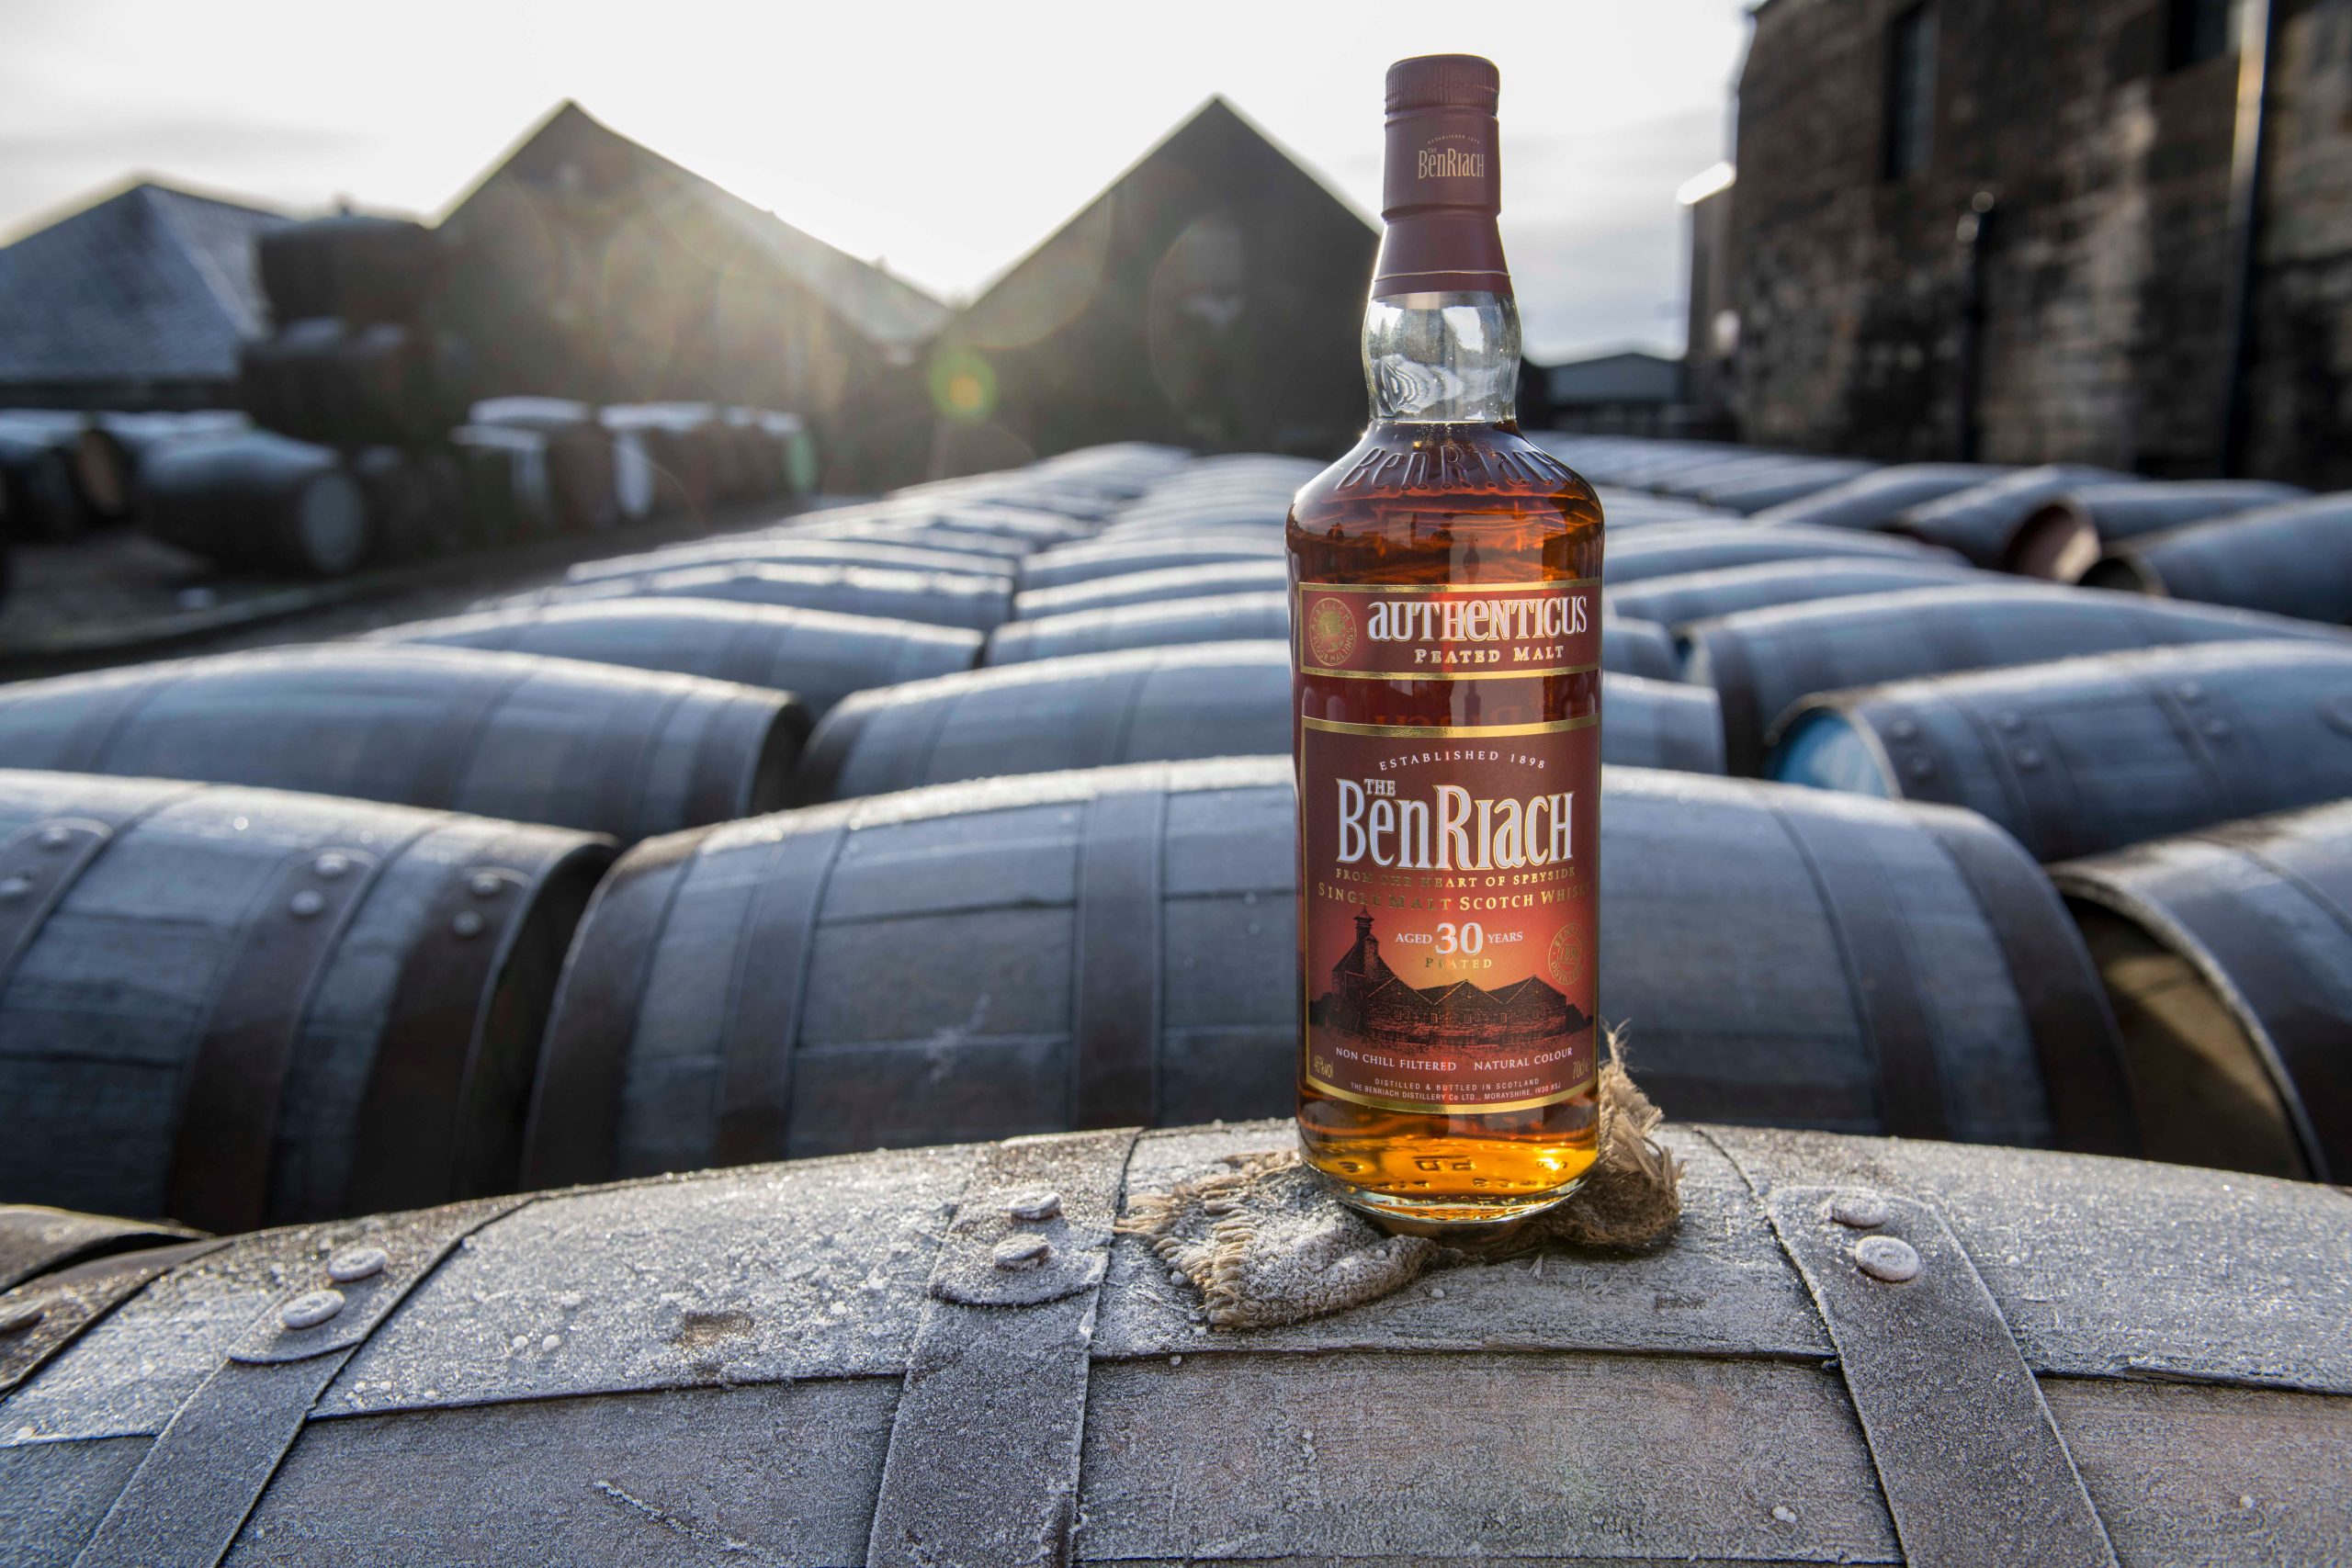 This BenRiach has waited 30 years for you to experience its peat-smoked flavor. Photo courtesy of BenRiach